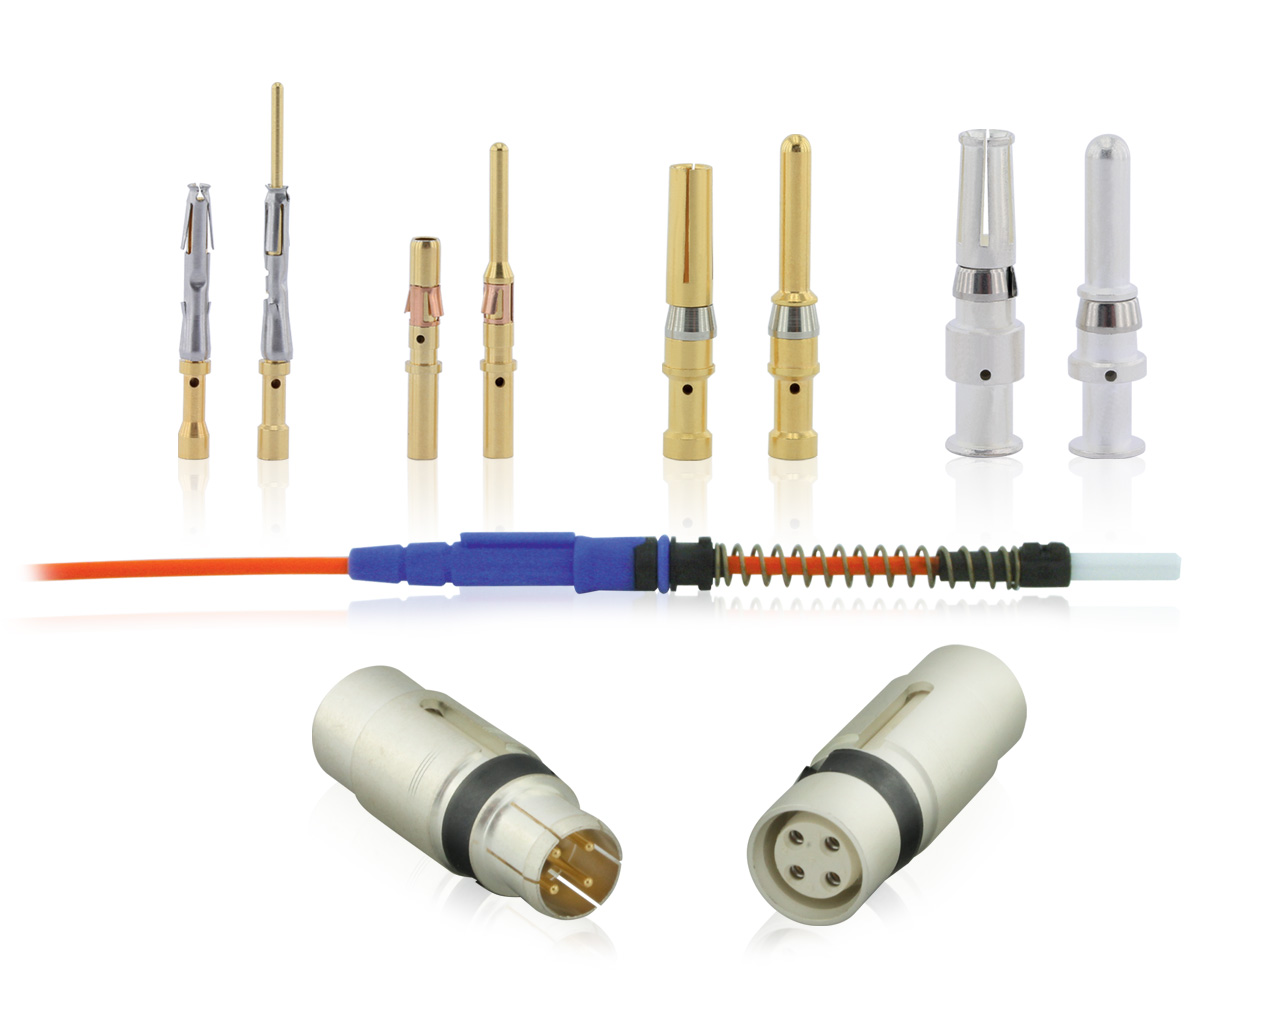 Choosing the Right Fibre Cable Connector